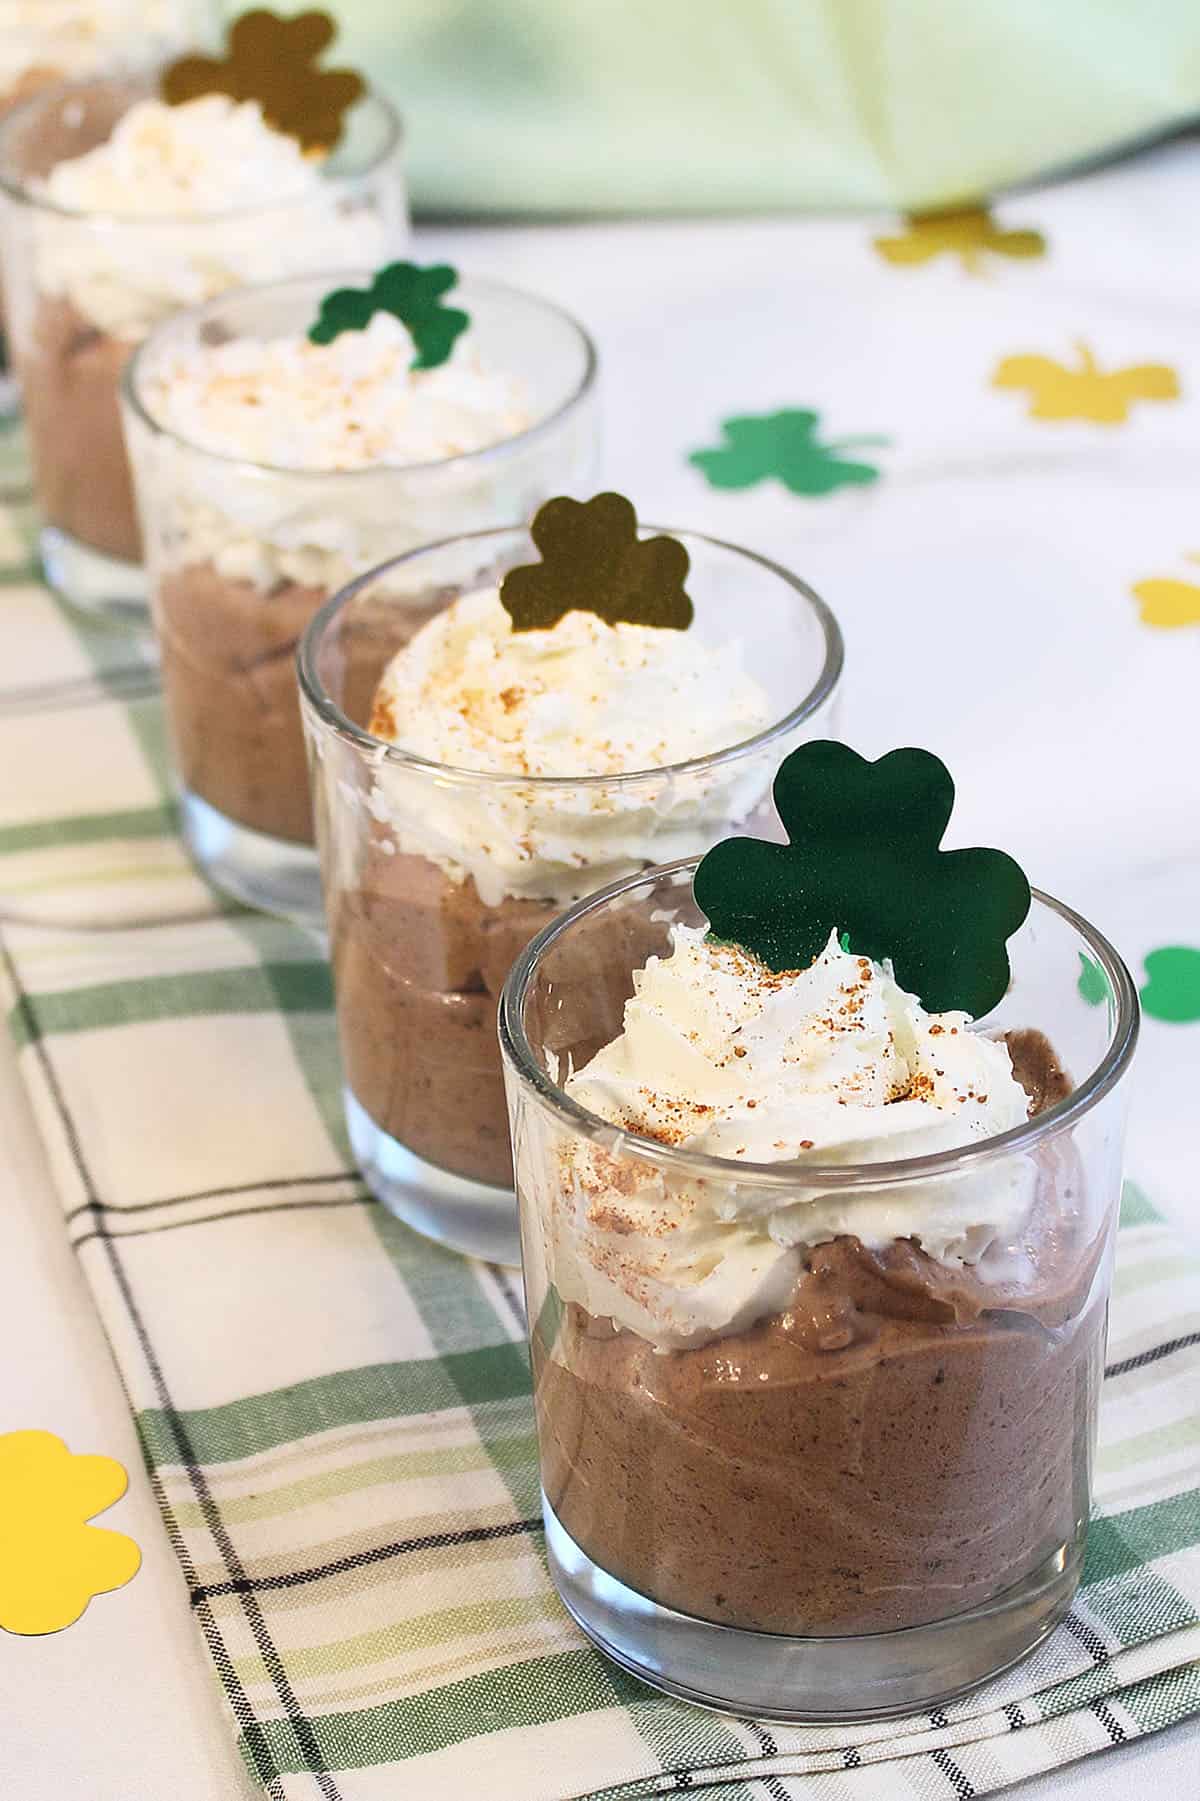 Irish coffee mousse desserts lined up on green plaid towel